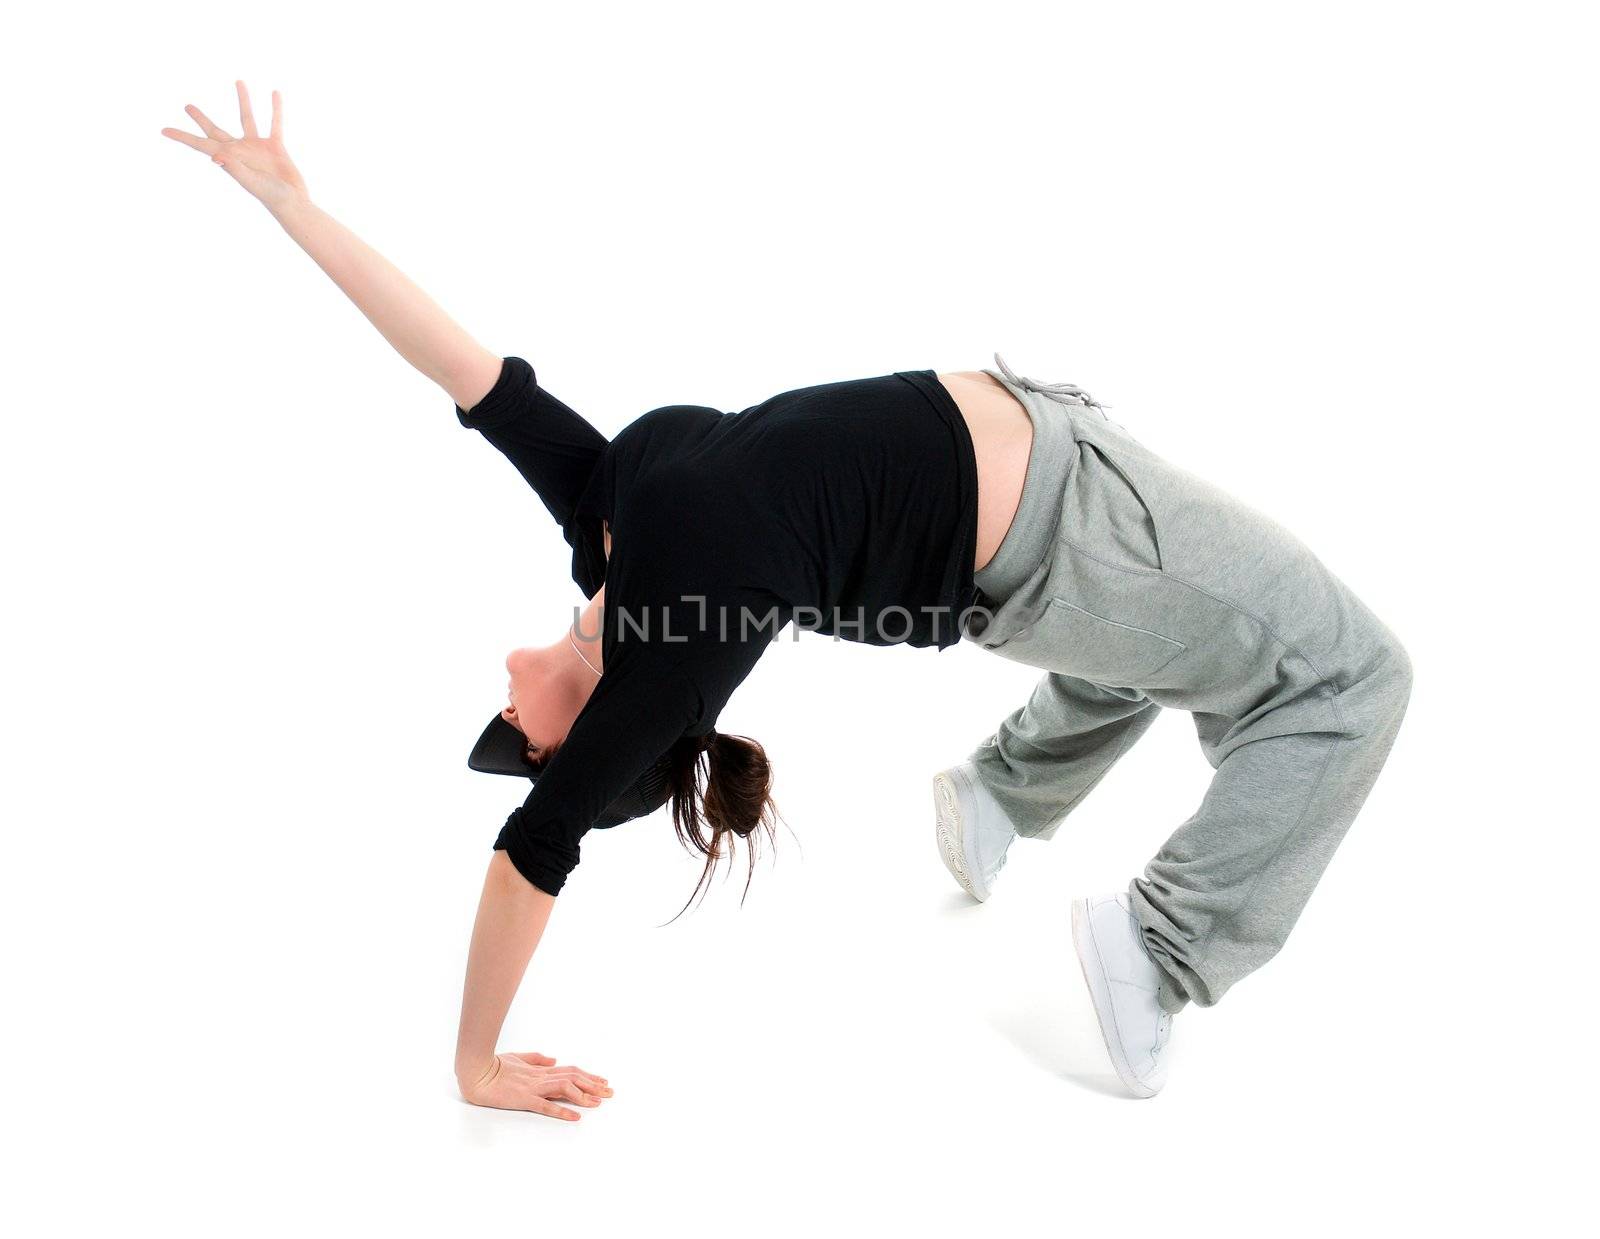 stylish and cool hip hop style dancer posing  on white background